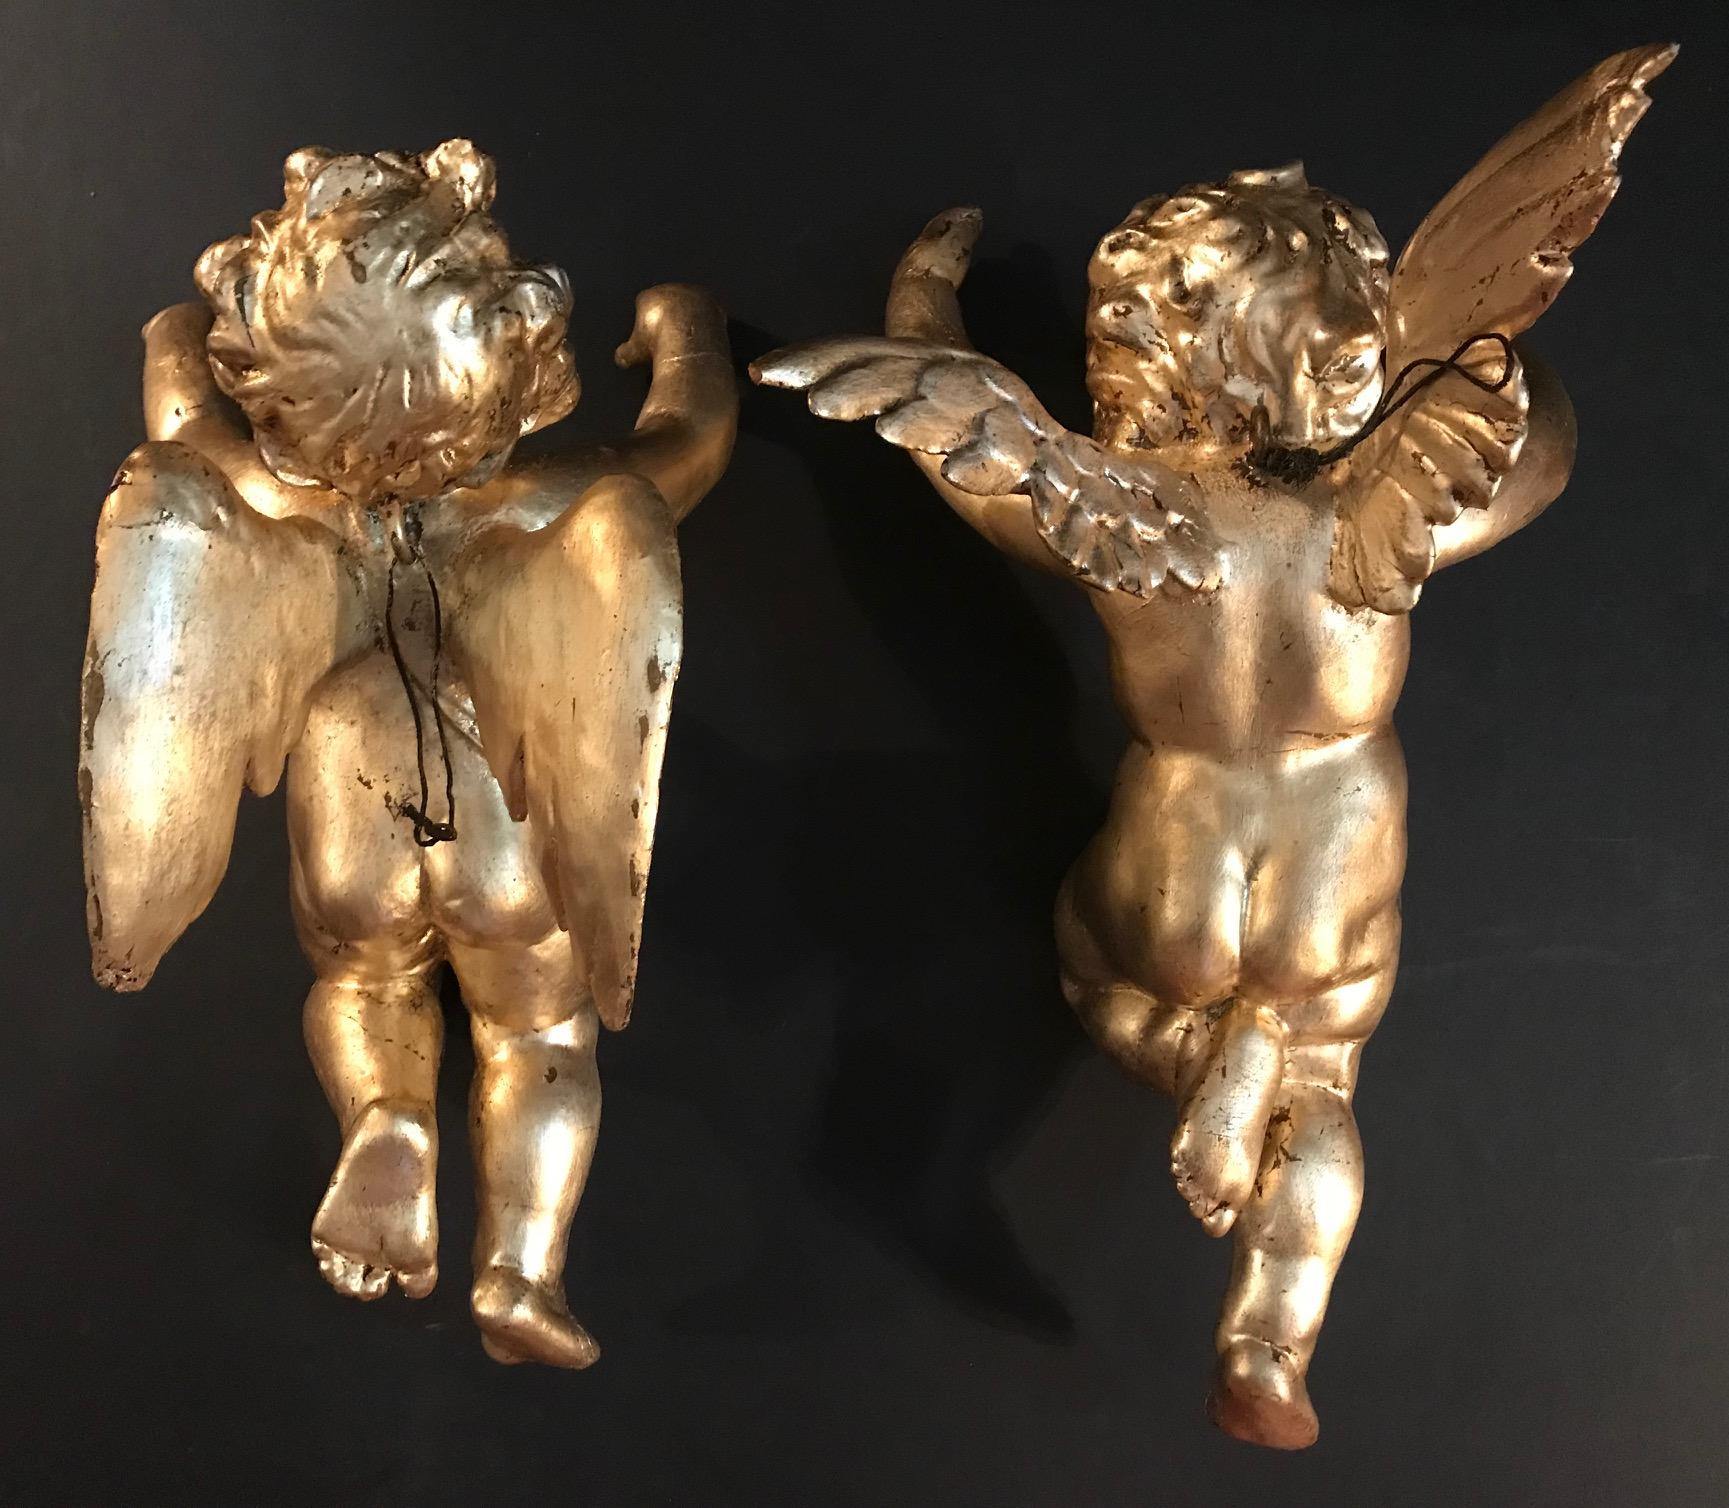 Antique Pair of Hanging Italian Hand Carved Wood Gilded Putti, Cherub, Angels 1